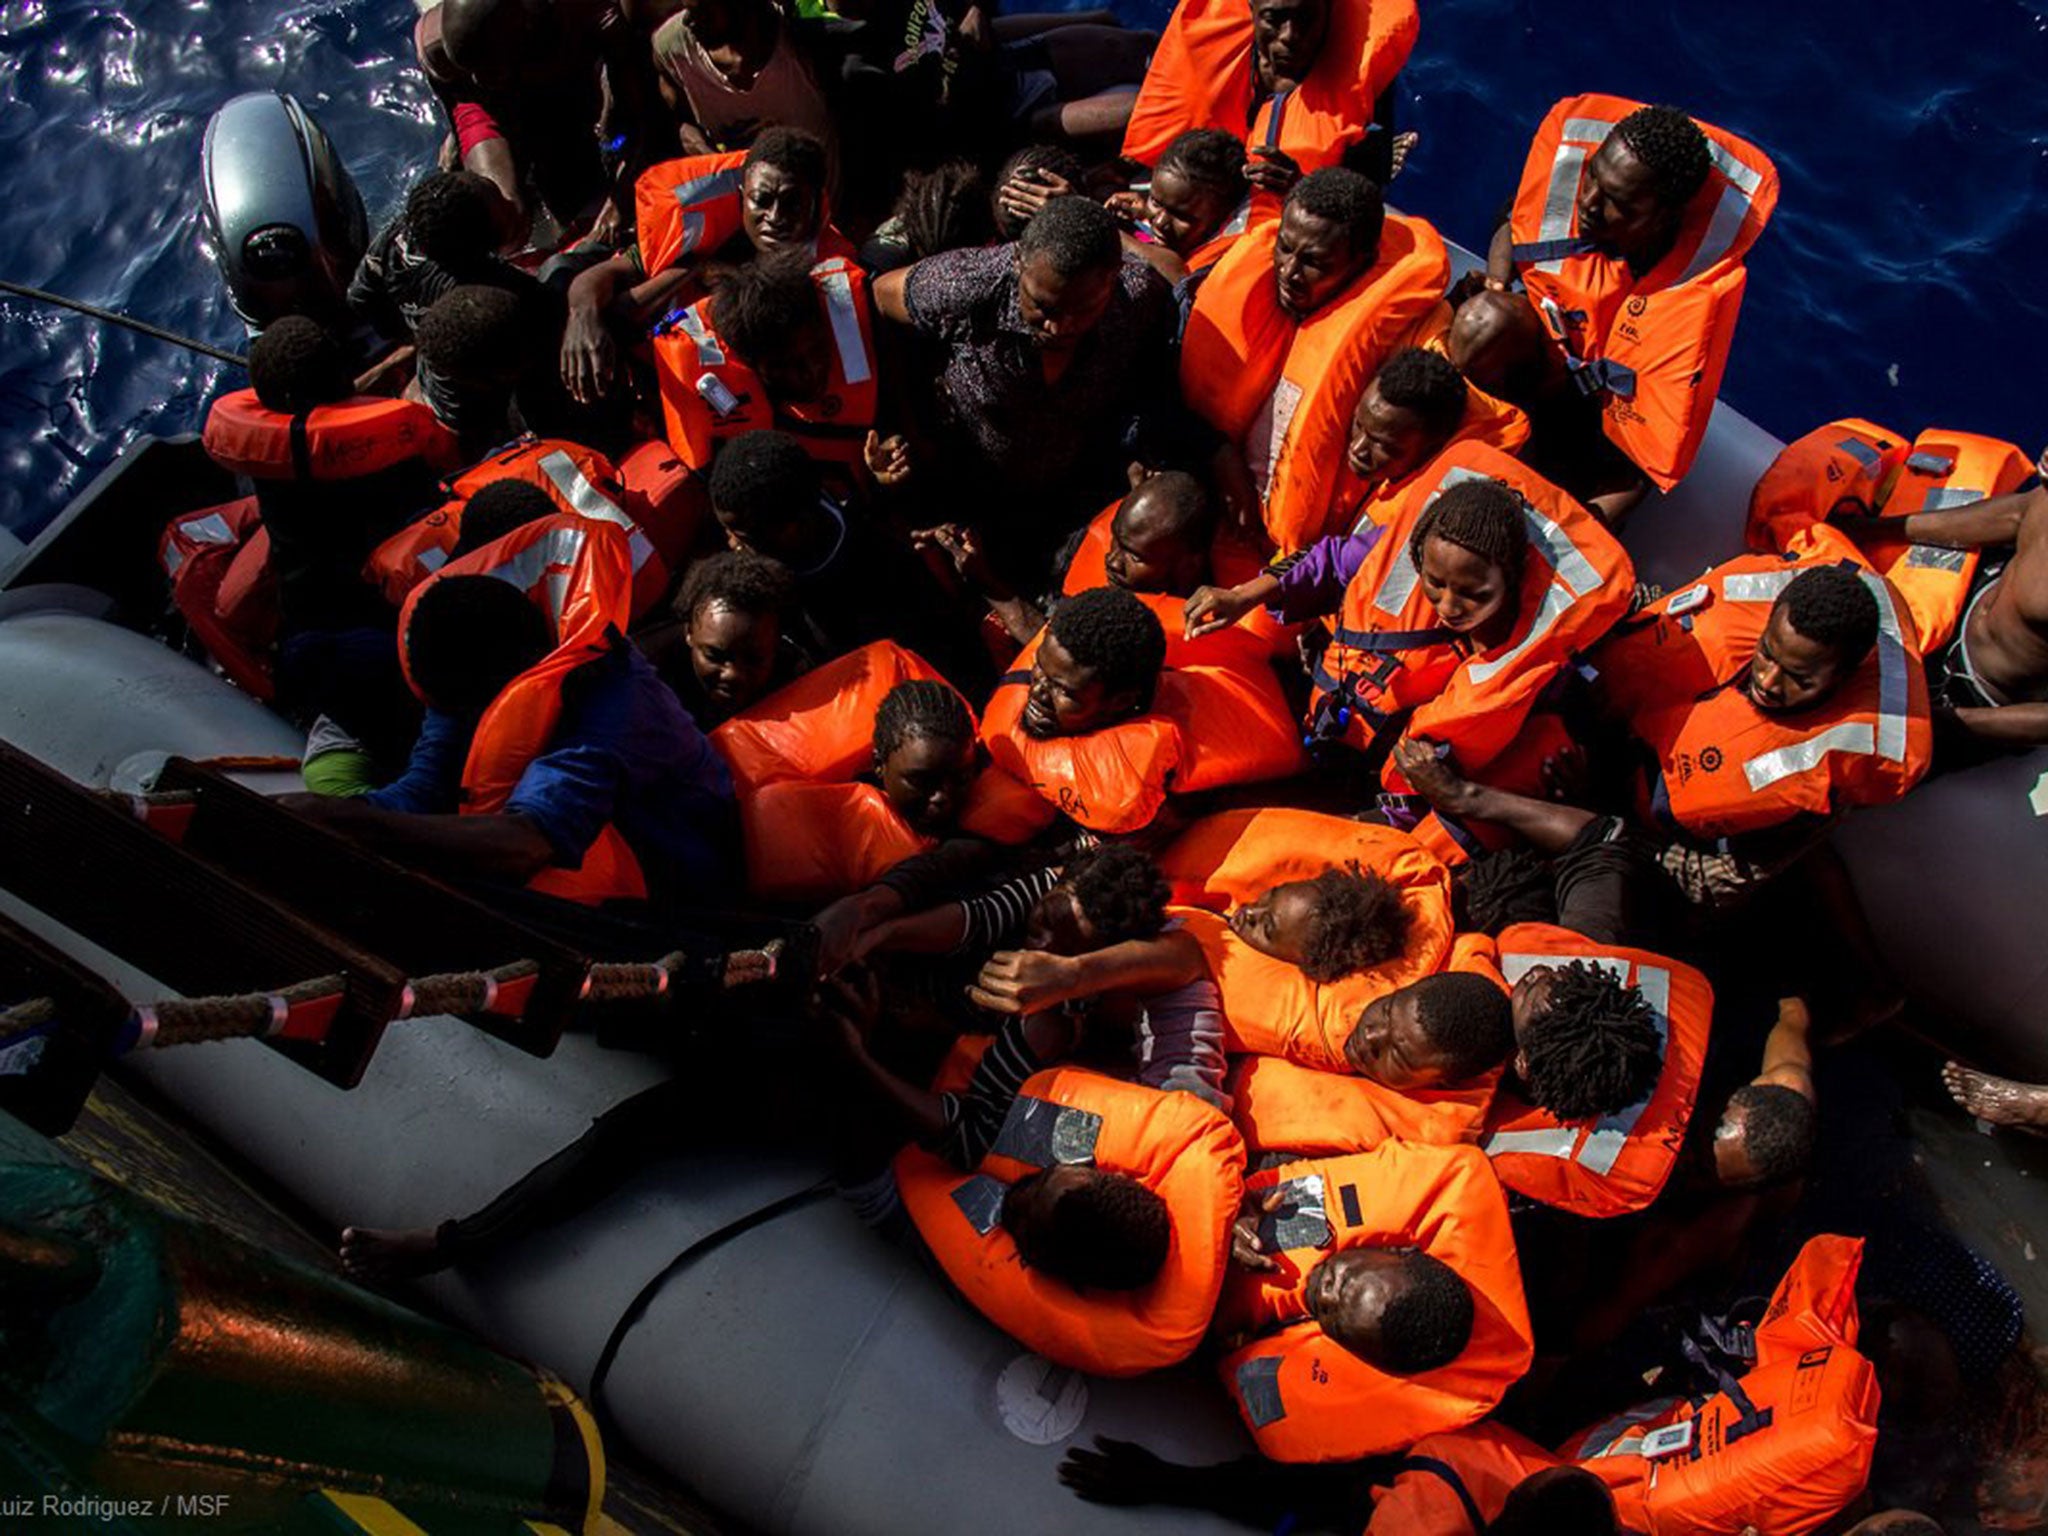 Refugees being rescued from a rubber dinghy where 25 bodies were found off the coast of Libya on 25 October